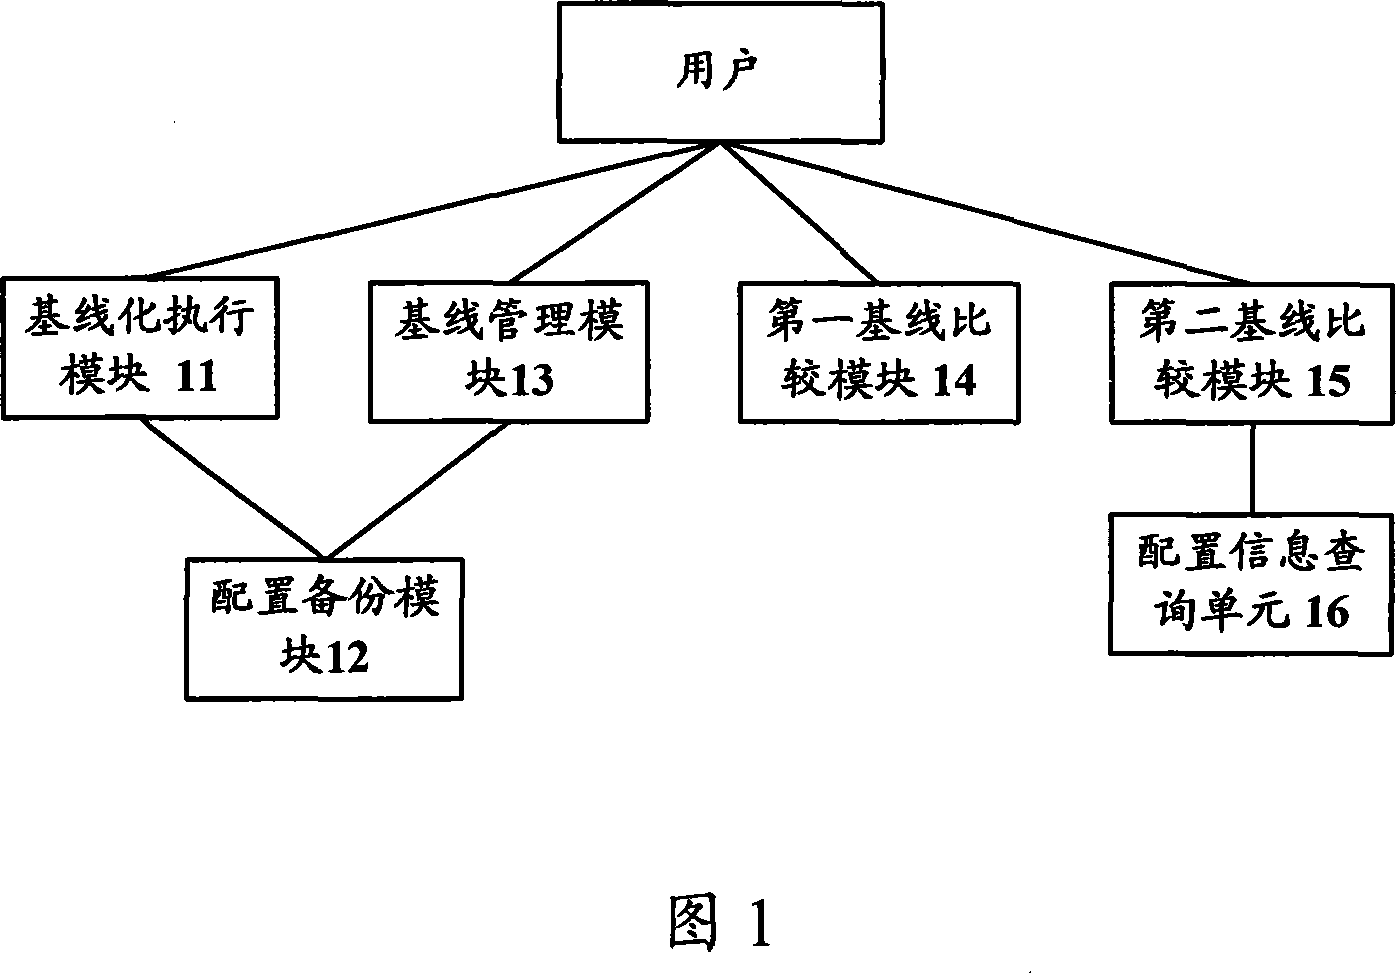 Network configuration management method and system